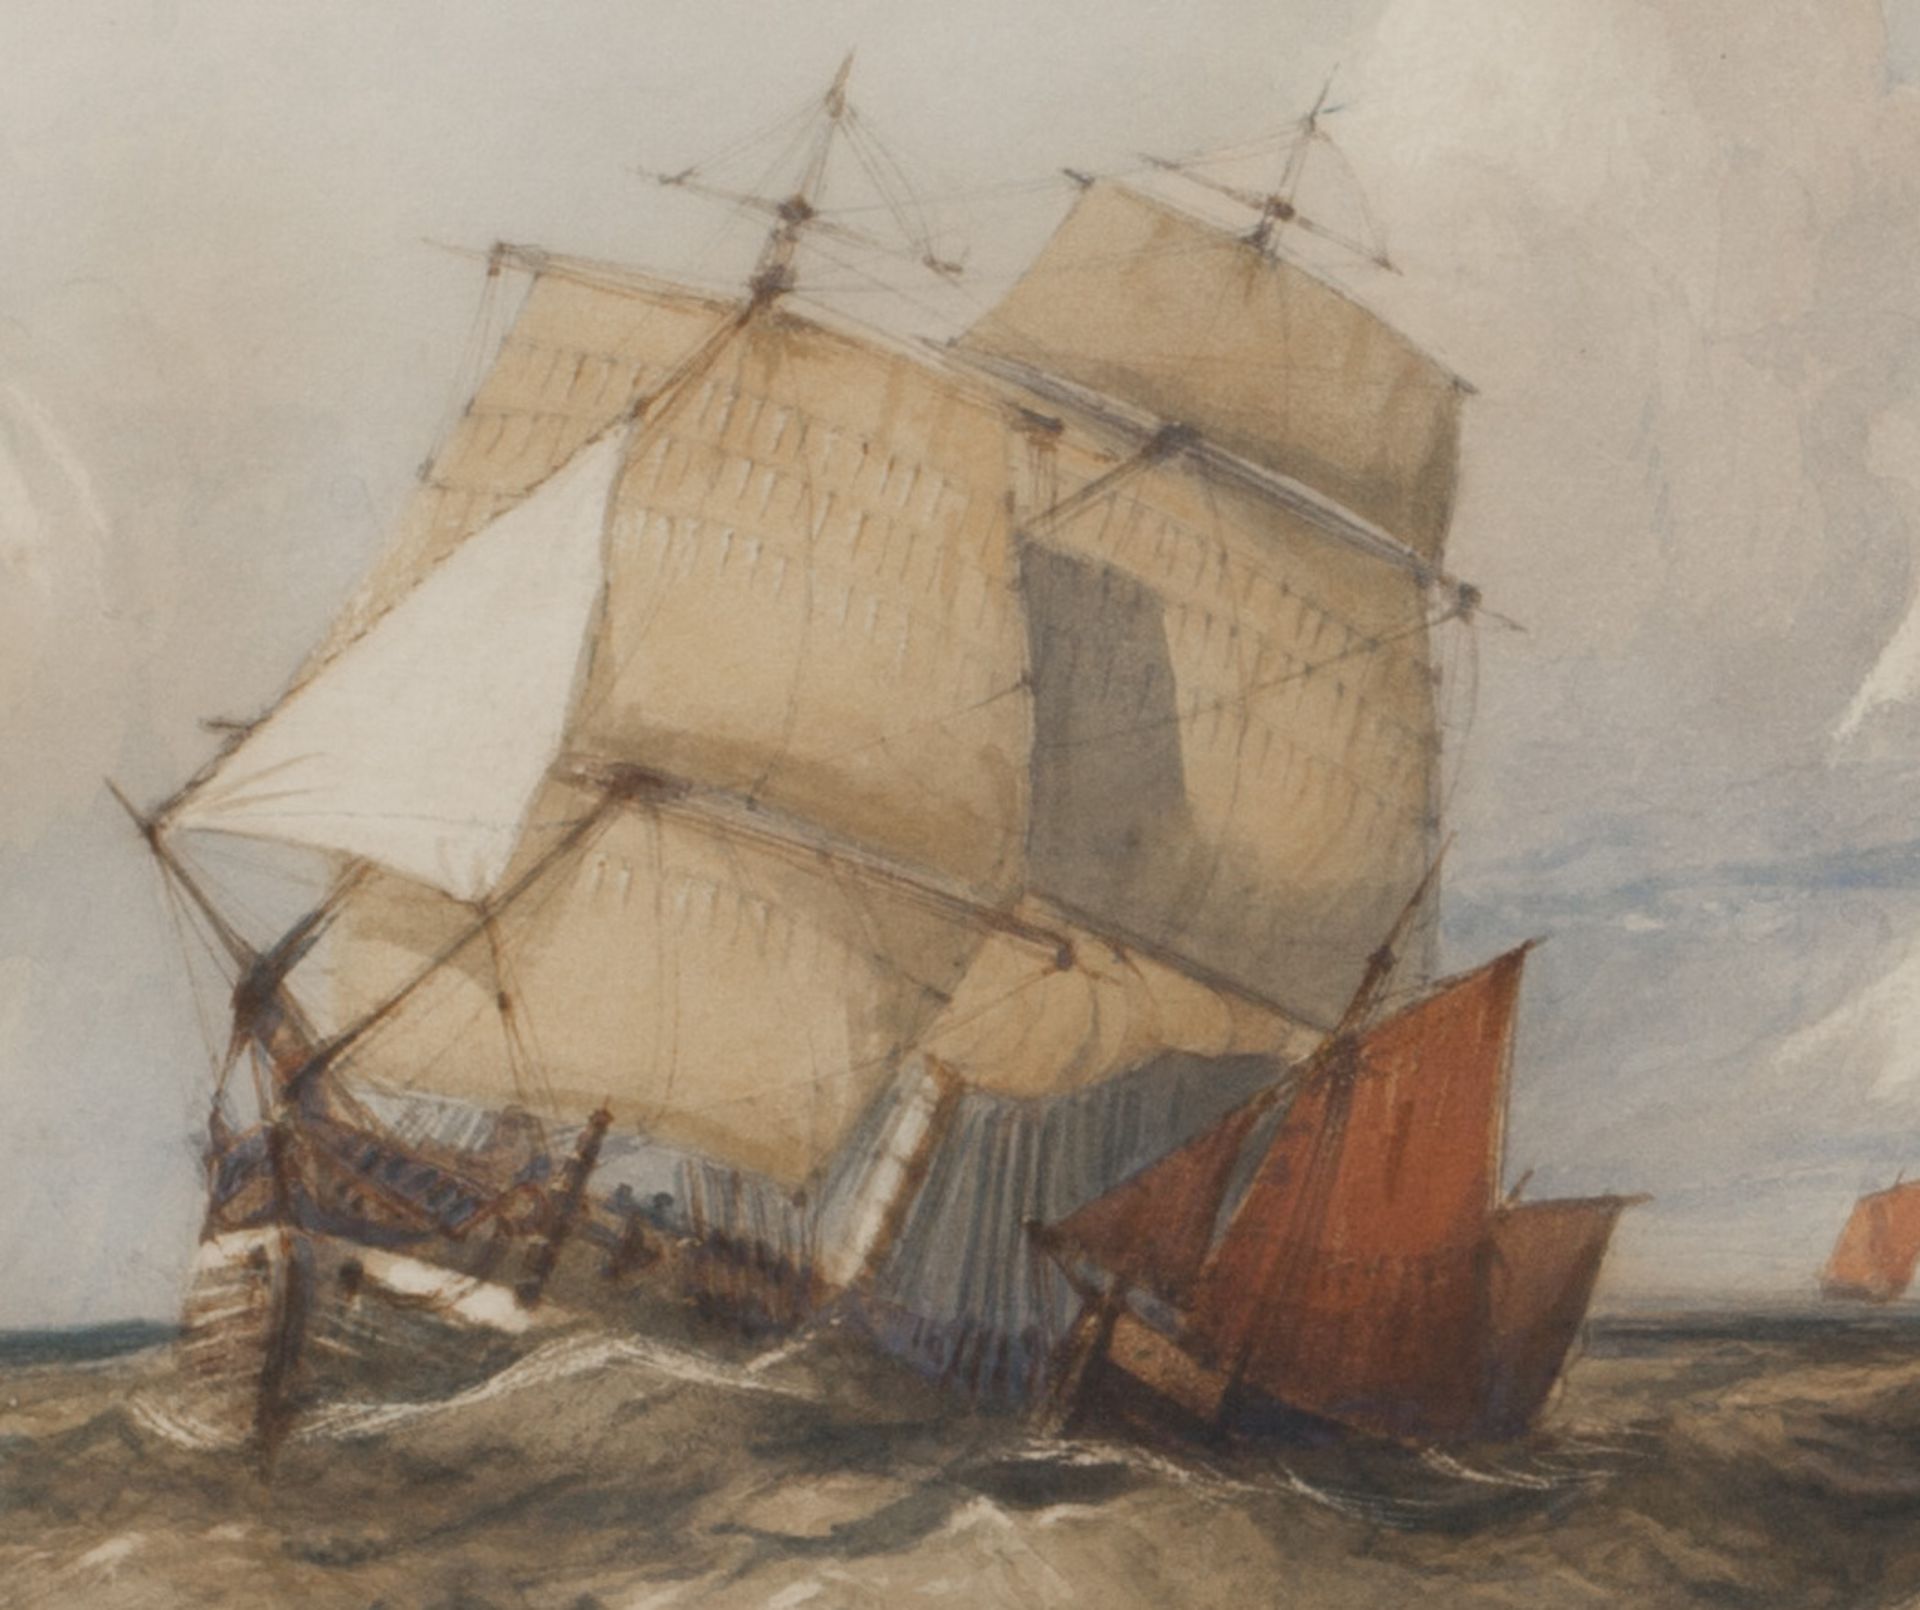 Original Charles Bentley 'ships In Rough Seas' Watercolour Early 19Th C. - FREE UK DELIVERY - Image 3 of 8